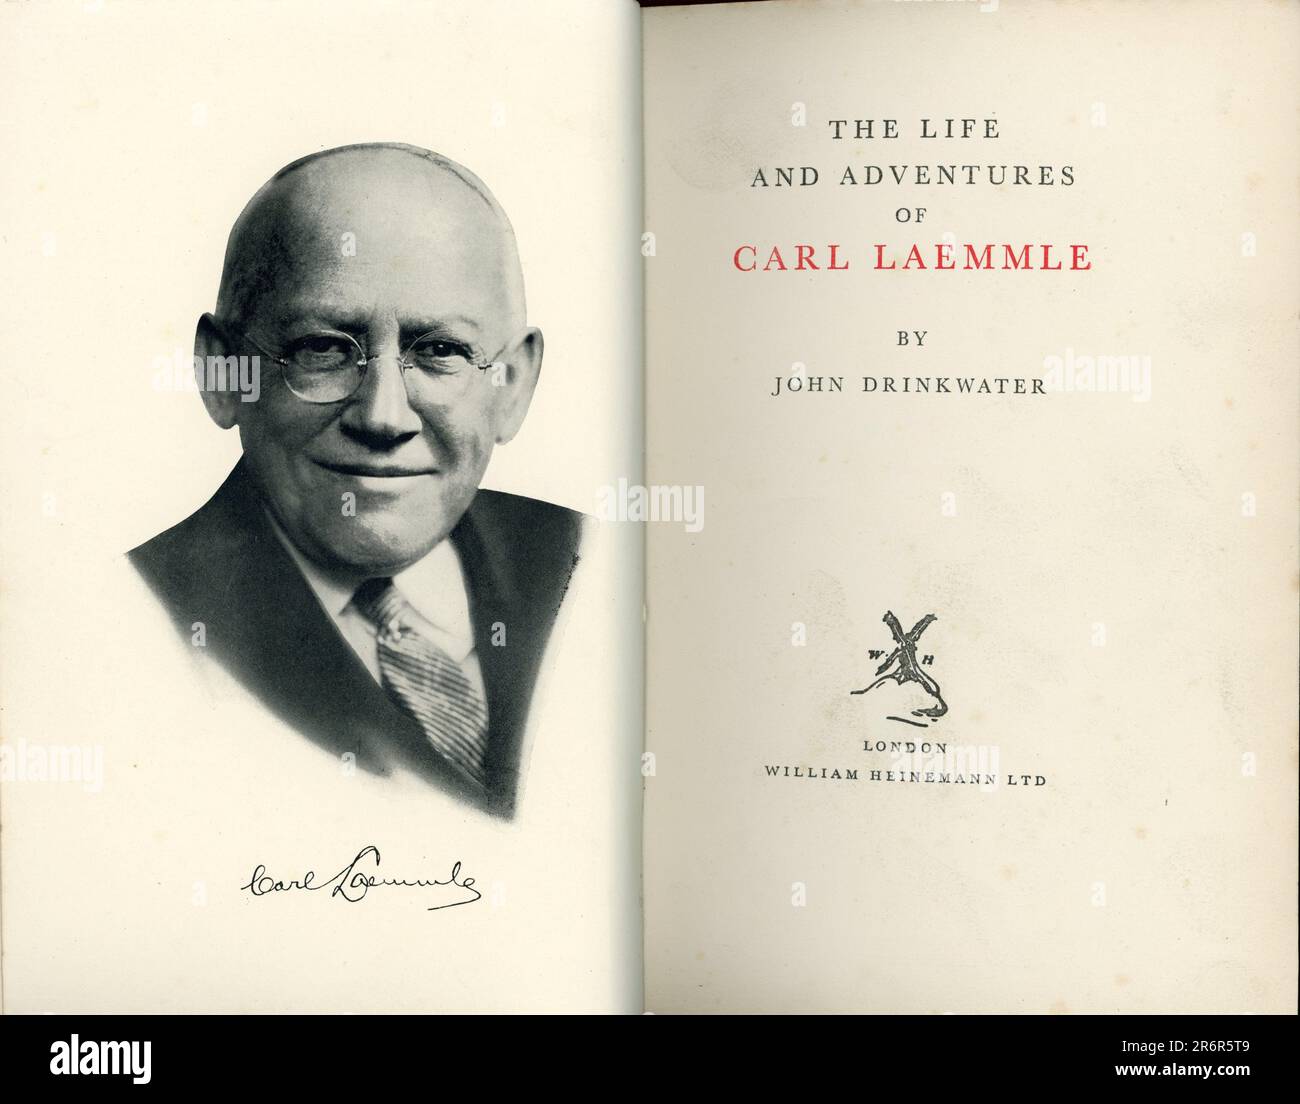 Frontispiece and Title Page of the British edition of the book THE LIFE AND ADVENTURES OF CARL LAEMMLE by JOHN DRINKWATER published in 1931 by William Heinemann Ltd Stock Photo